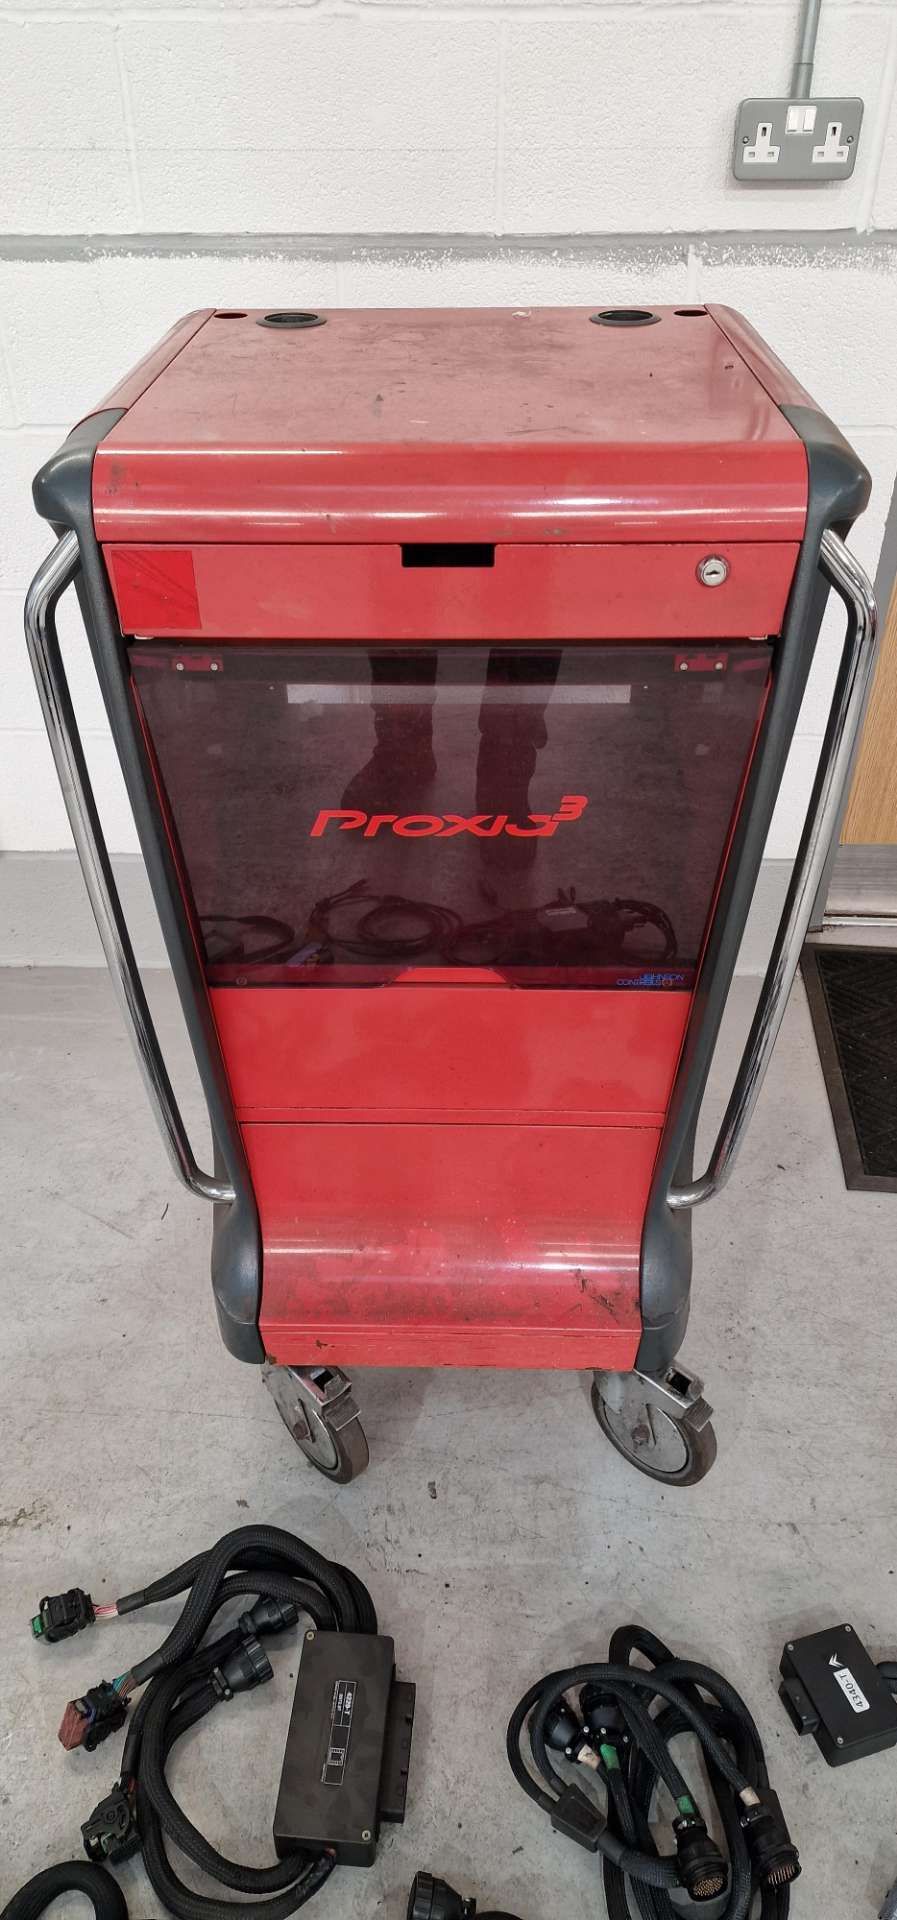 EX-CITROEN DIAGNOSTIC TROLLEY PROXI 3, with some diagnostic kit - Image 3 of 4